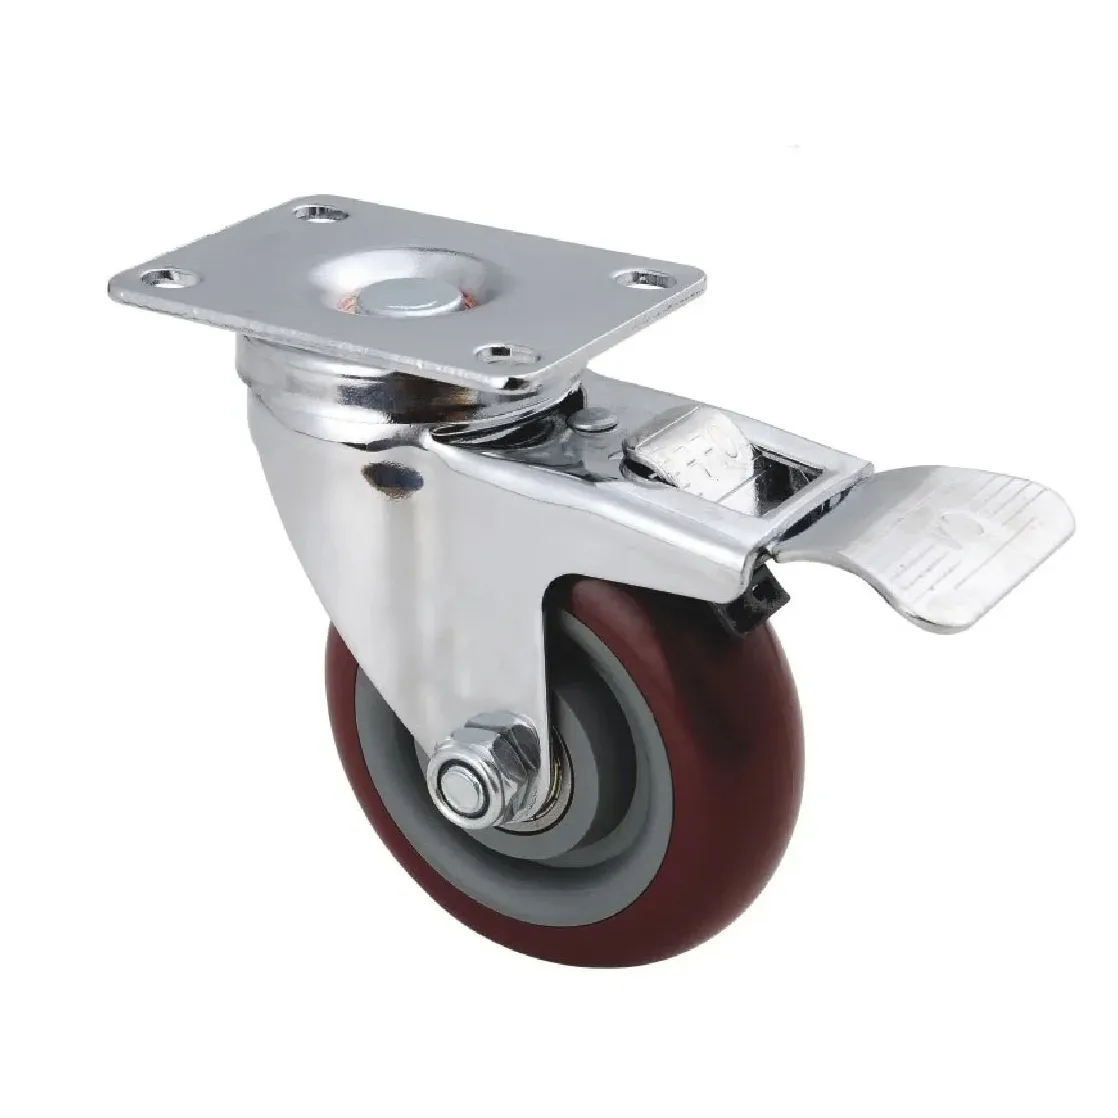 China Industry Brake Attaching Caster Pvc Pu Rubber Tpr ESD Wheels Industry Caster Wheels 3/4/5 Inch Spring Loaded Caster Wheel